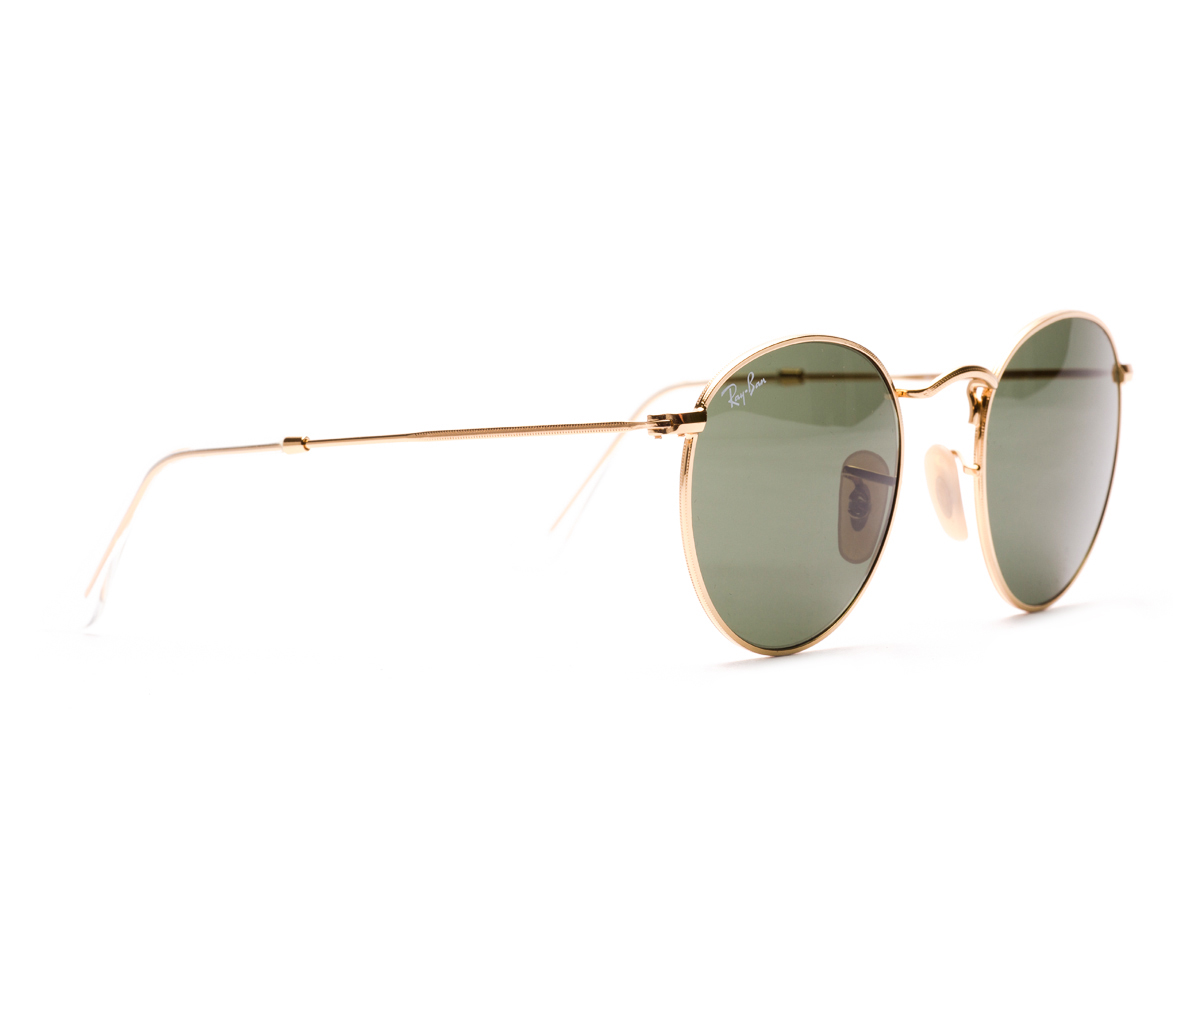 RB 3447 001 — Ray-Ban Round Metal 